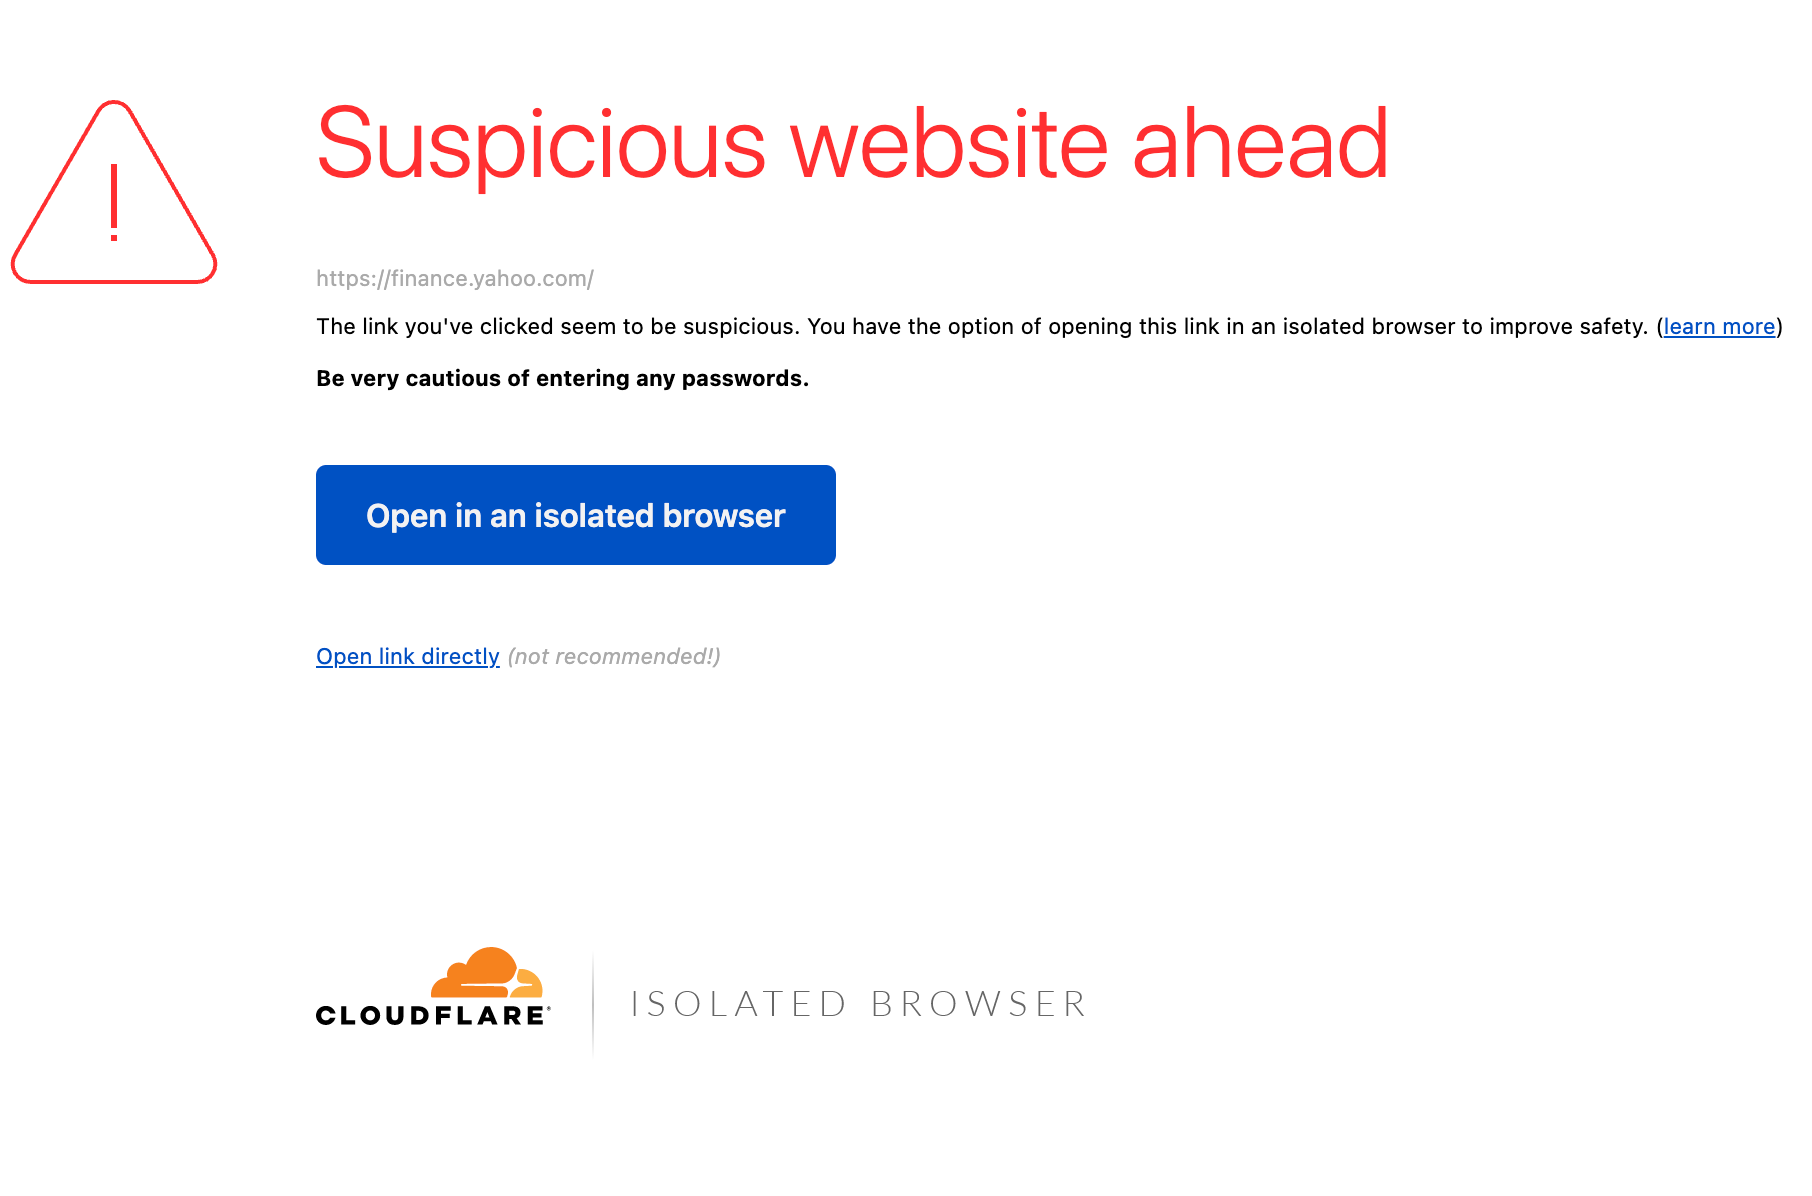 Introducing browser isolation for email links to stop modern phishing threats